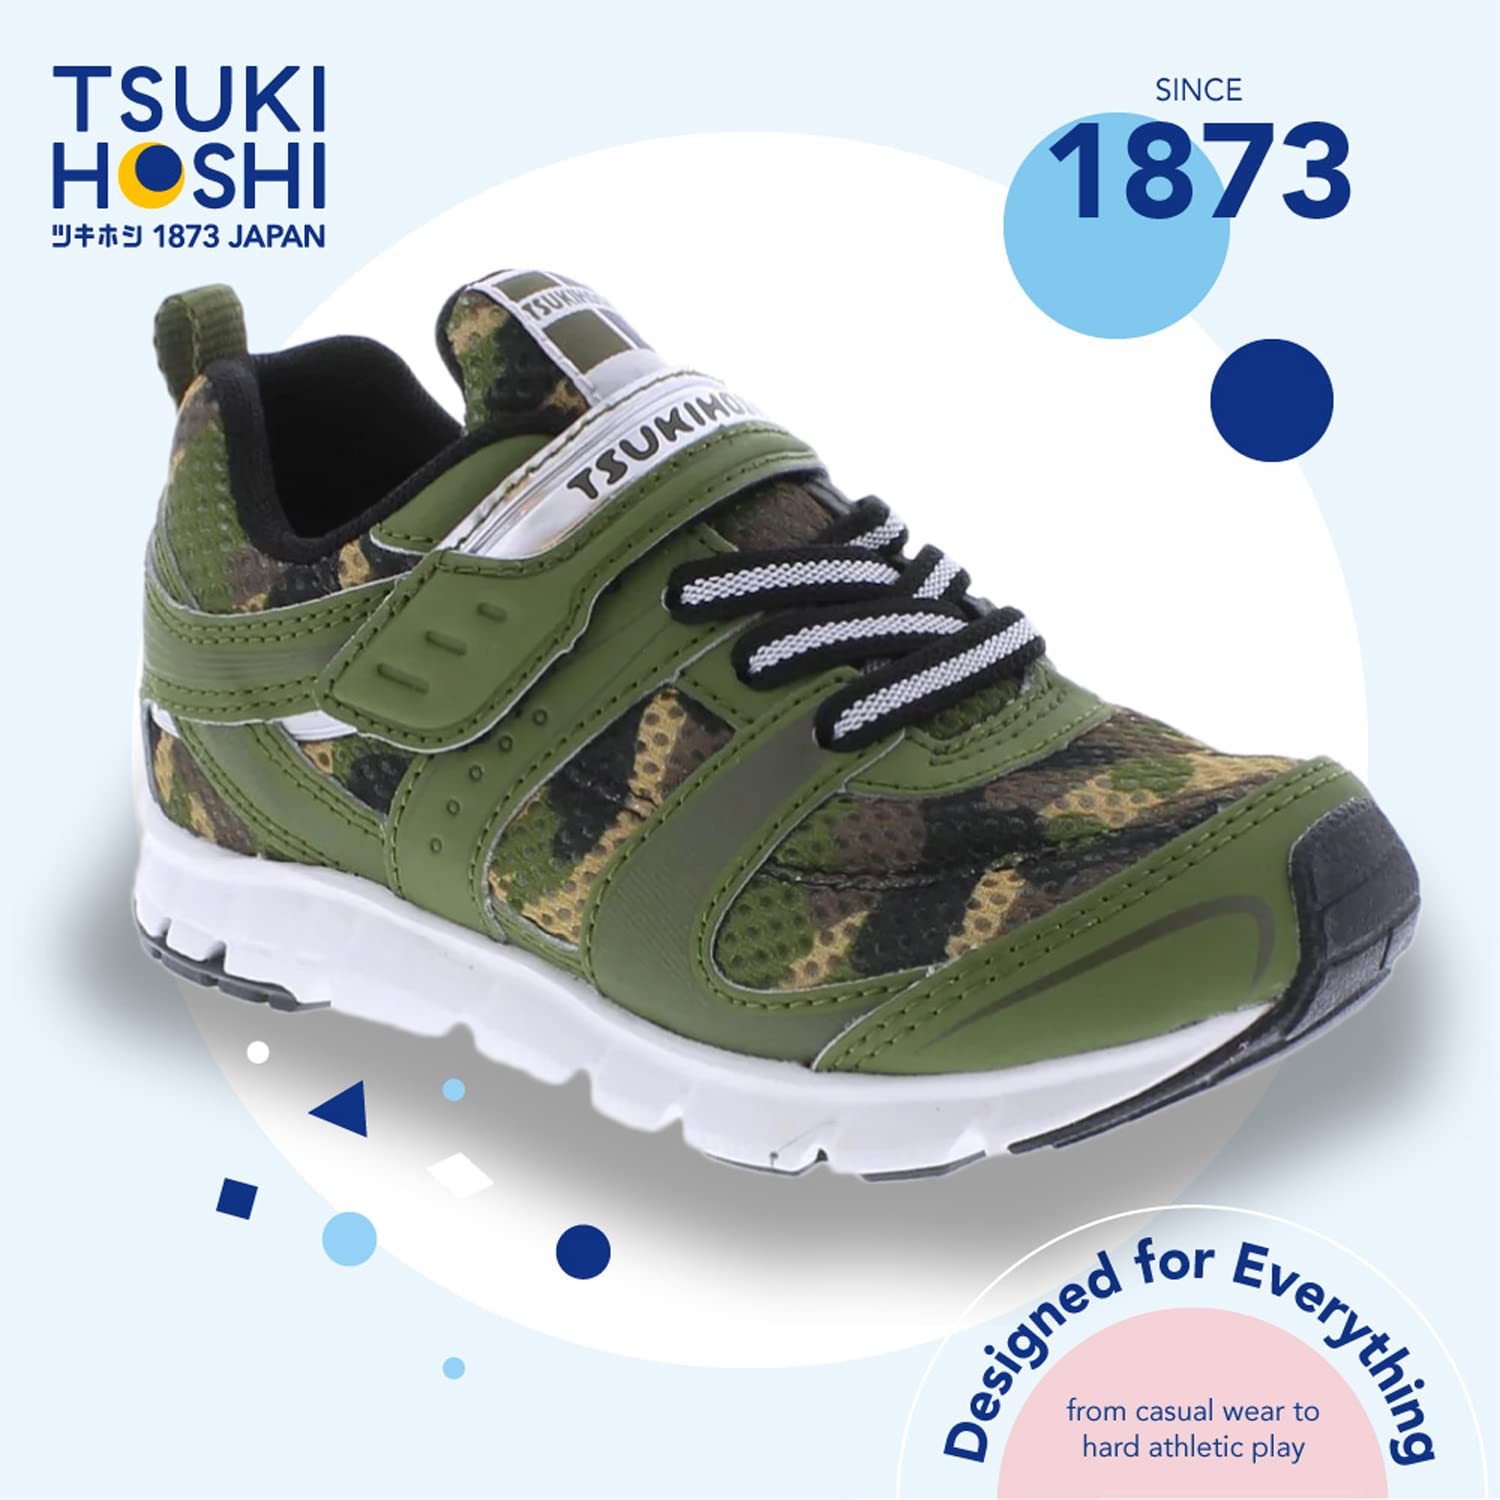 TSUKIHOSHI 3580 Velocity Strap-Closure Machine-Washable Child Sneaker Shoe with Wide Toe Box and Slip-Resistant, Non-Marking Outsole, Green/Camo - 9.5 Toddler (1-4 Years)